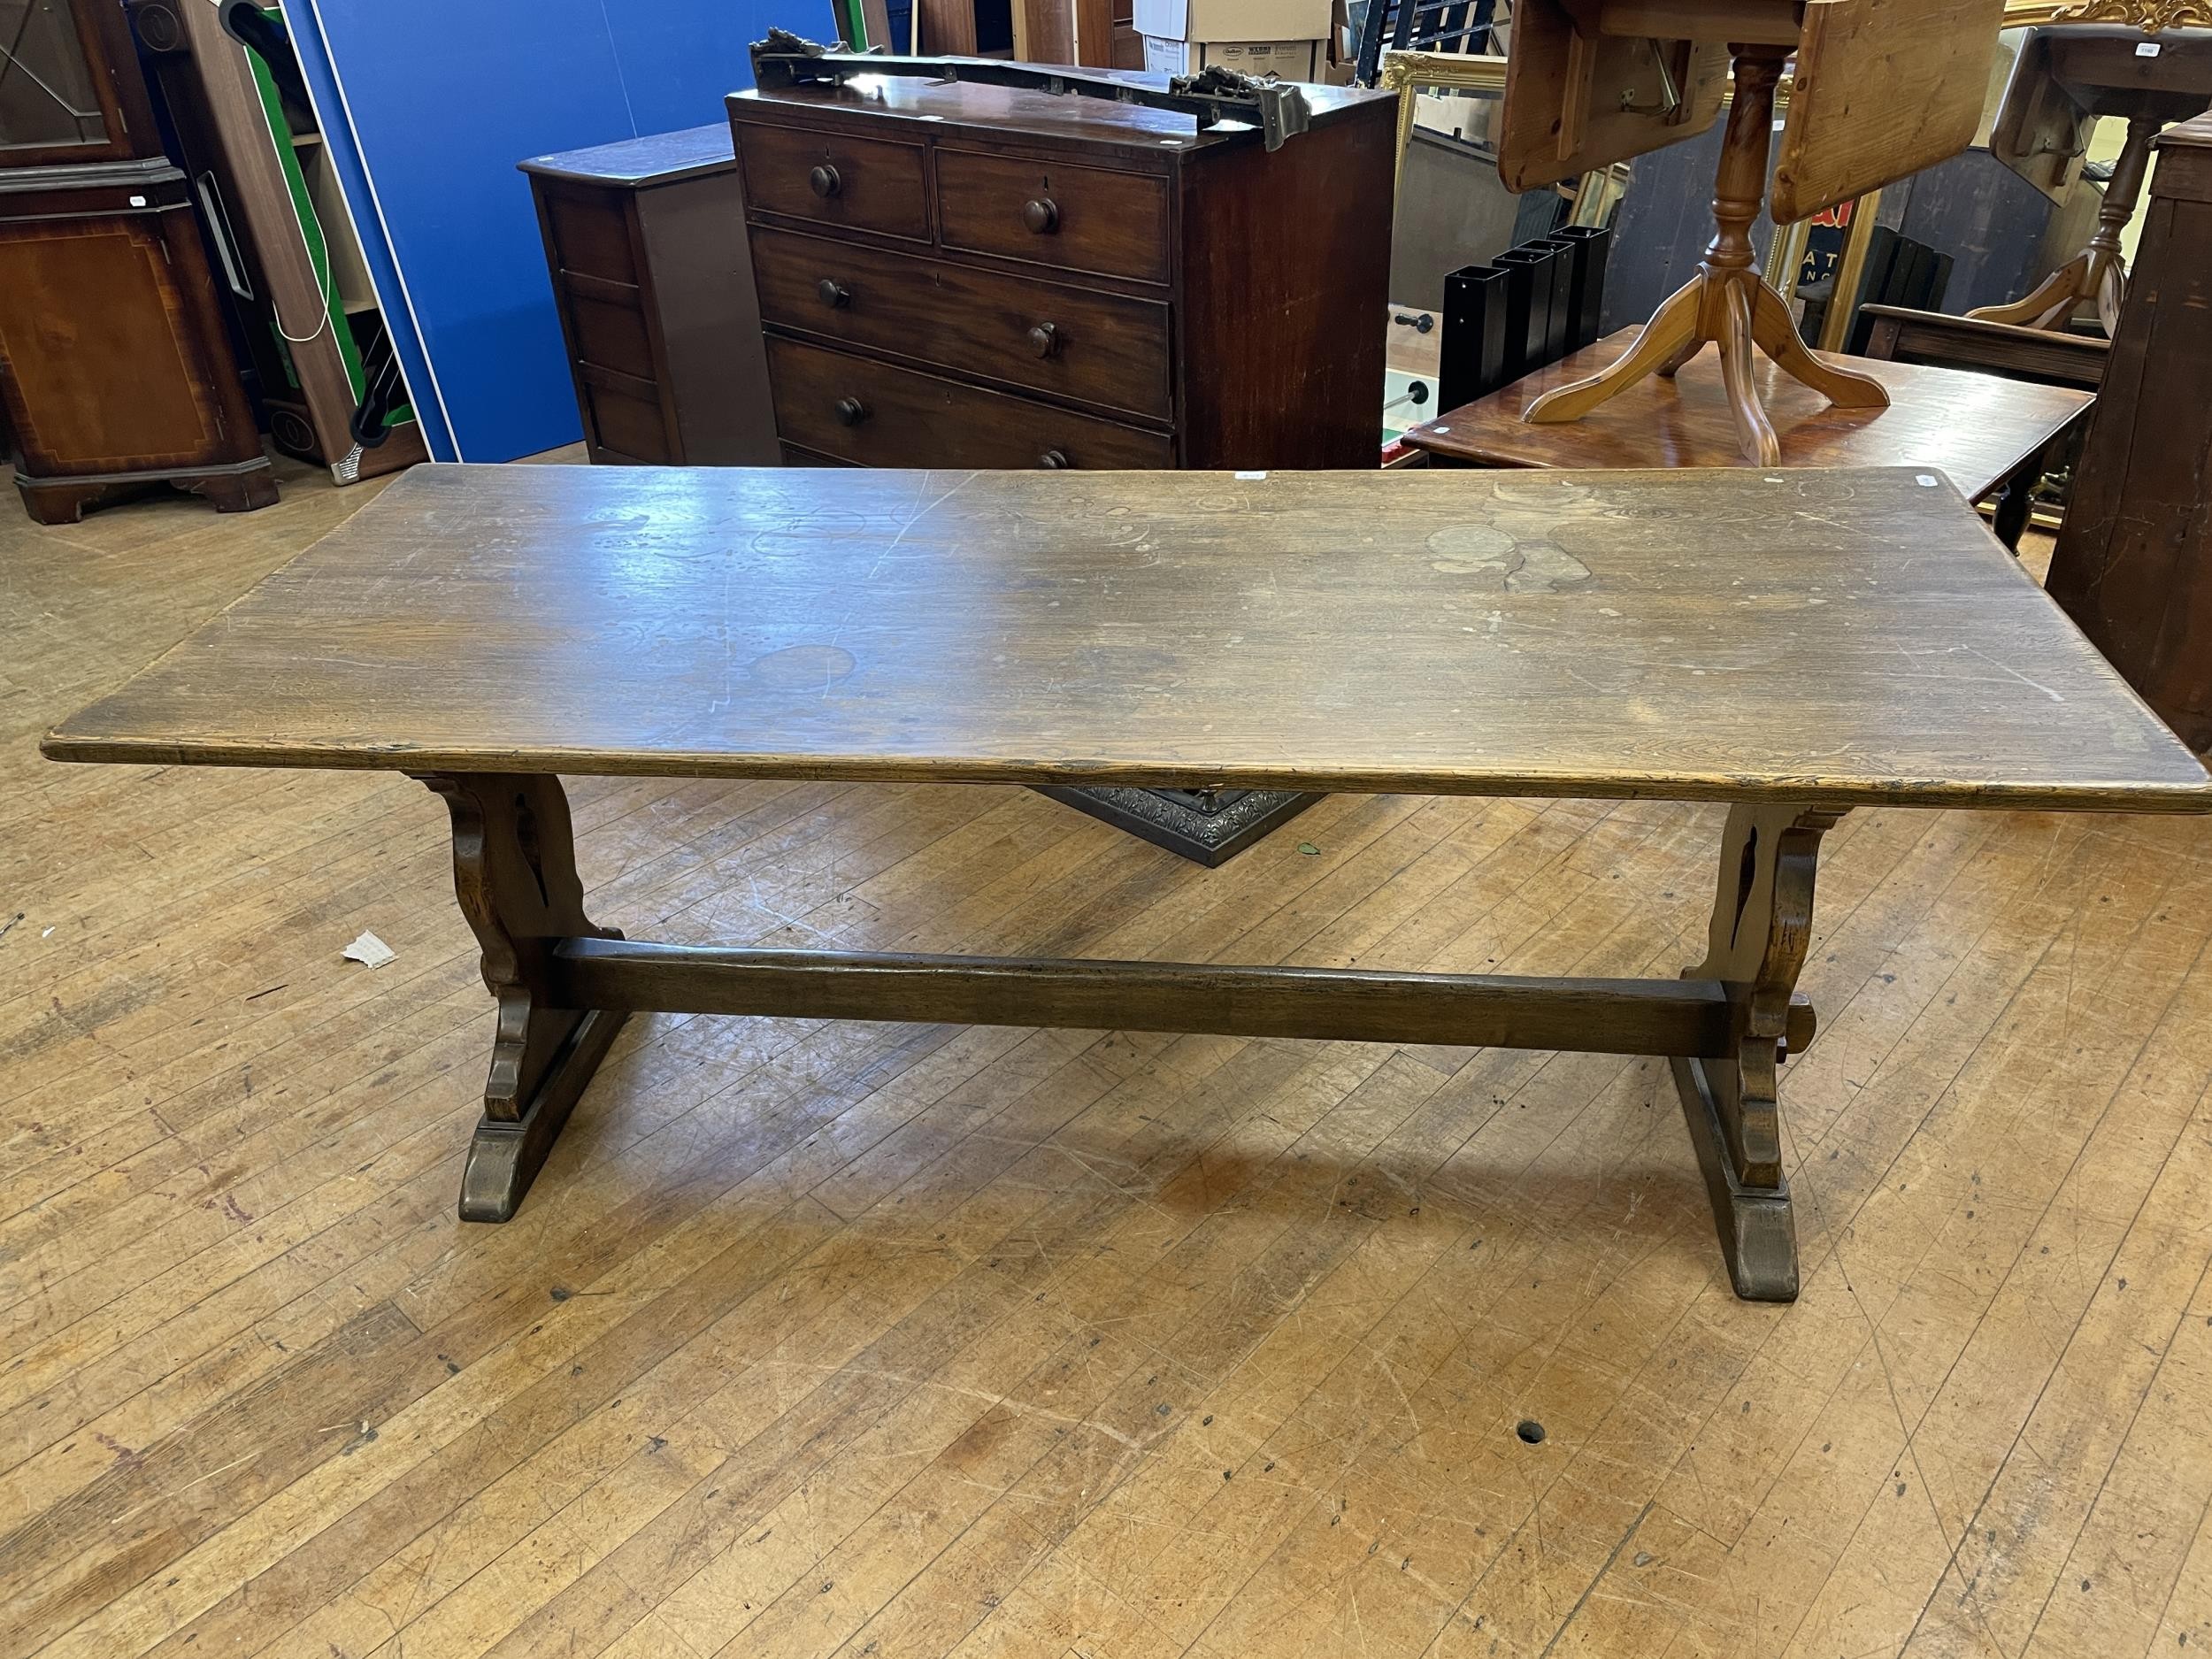 An oak refectory dining table, 210 x 80 cm